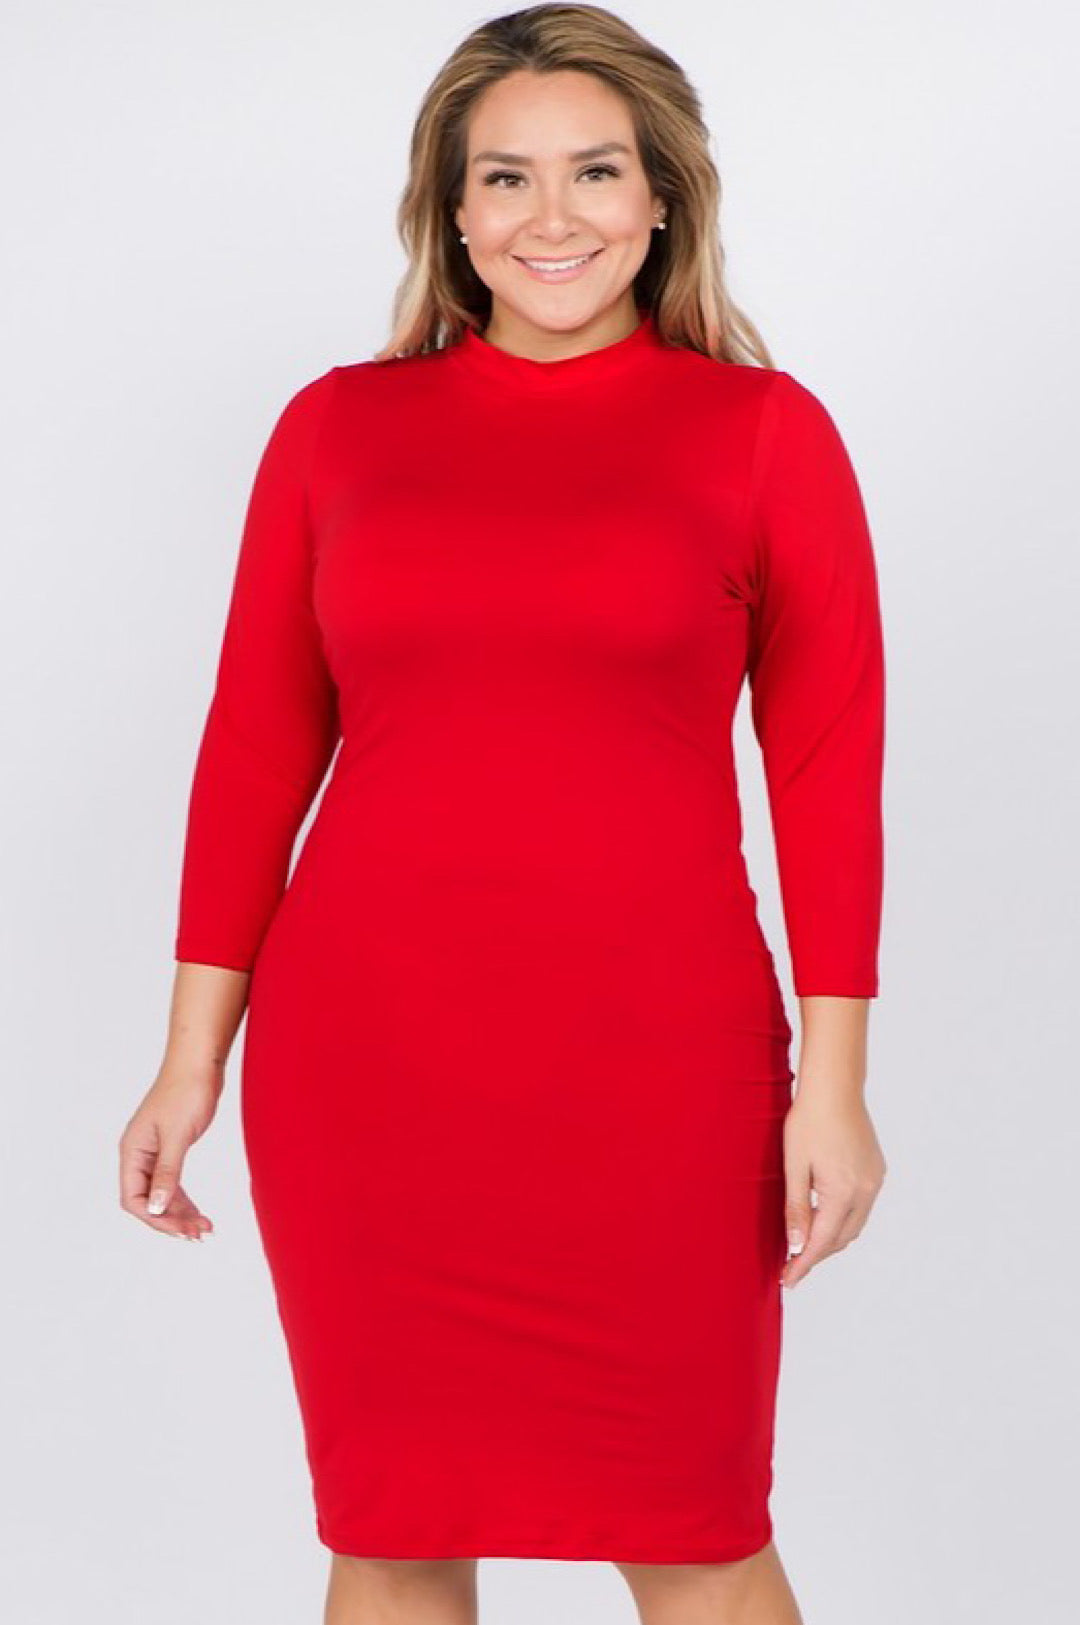 Red Mock Neck Form Fitted Dress Dress